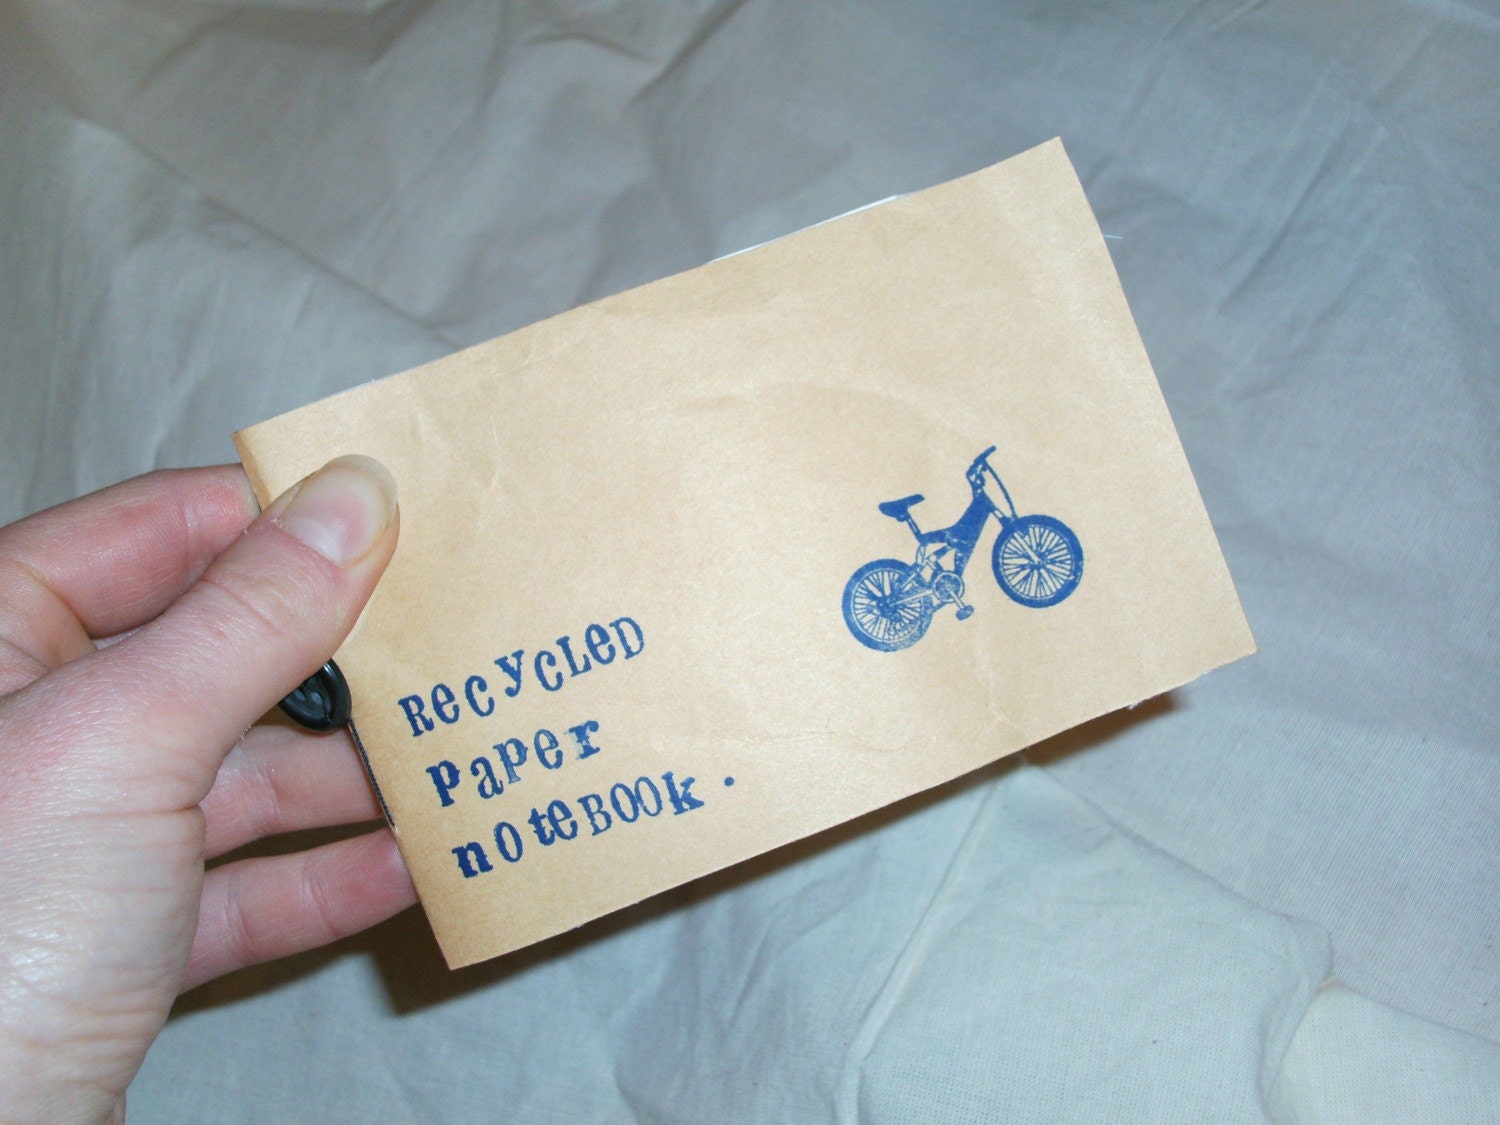 Recycled paper notebook (bike)